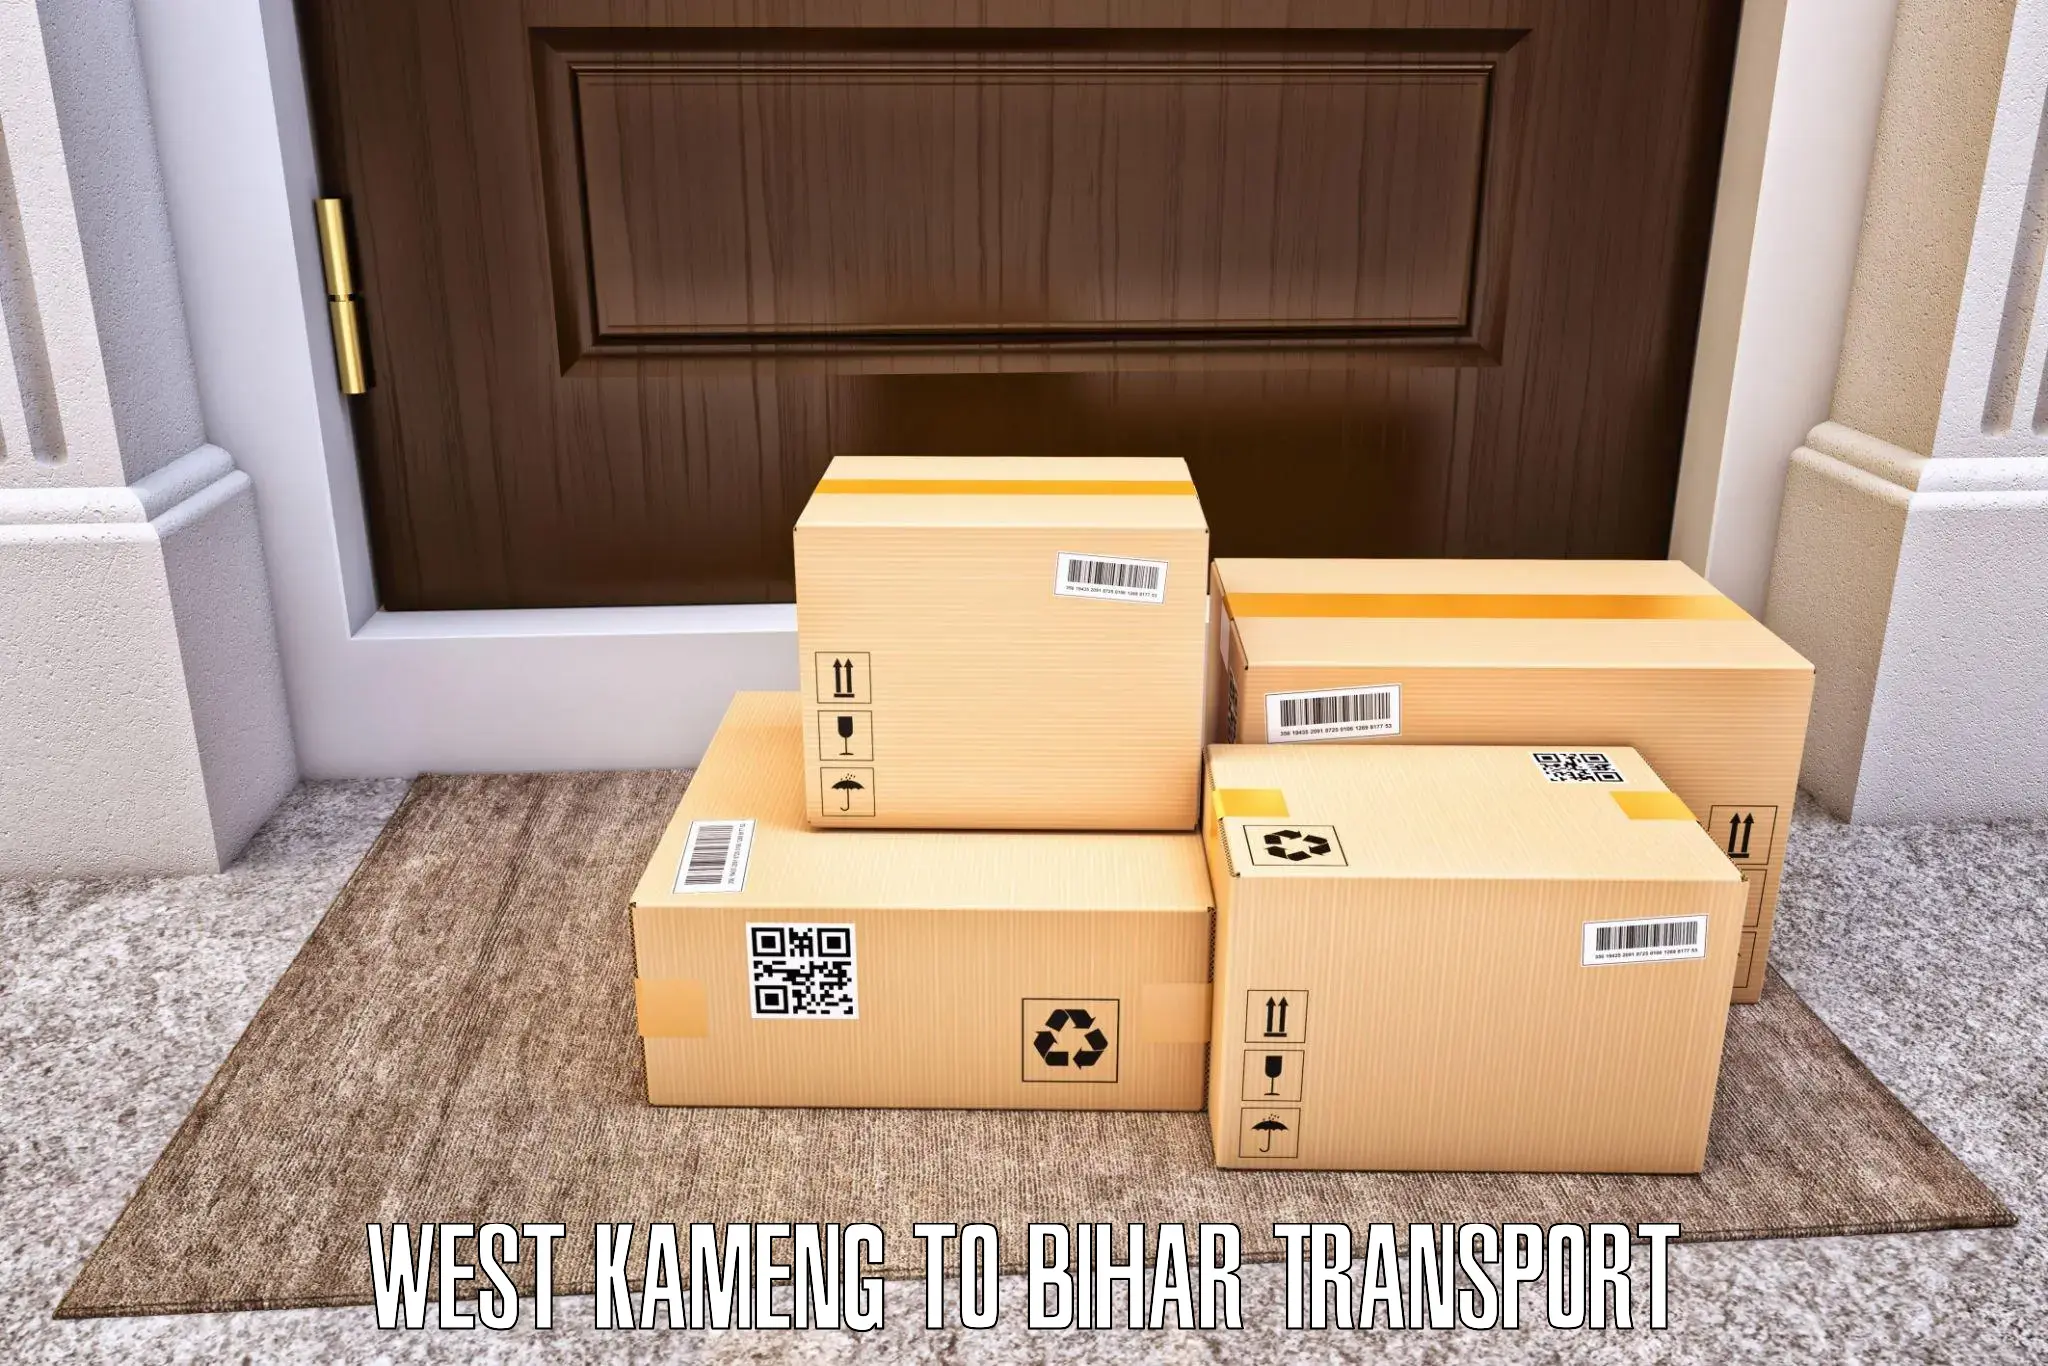 Shipping partner in West Kameng to Hasanpura